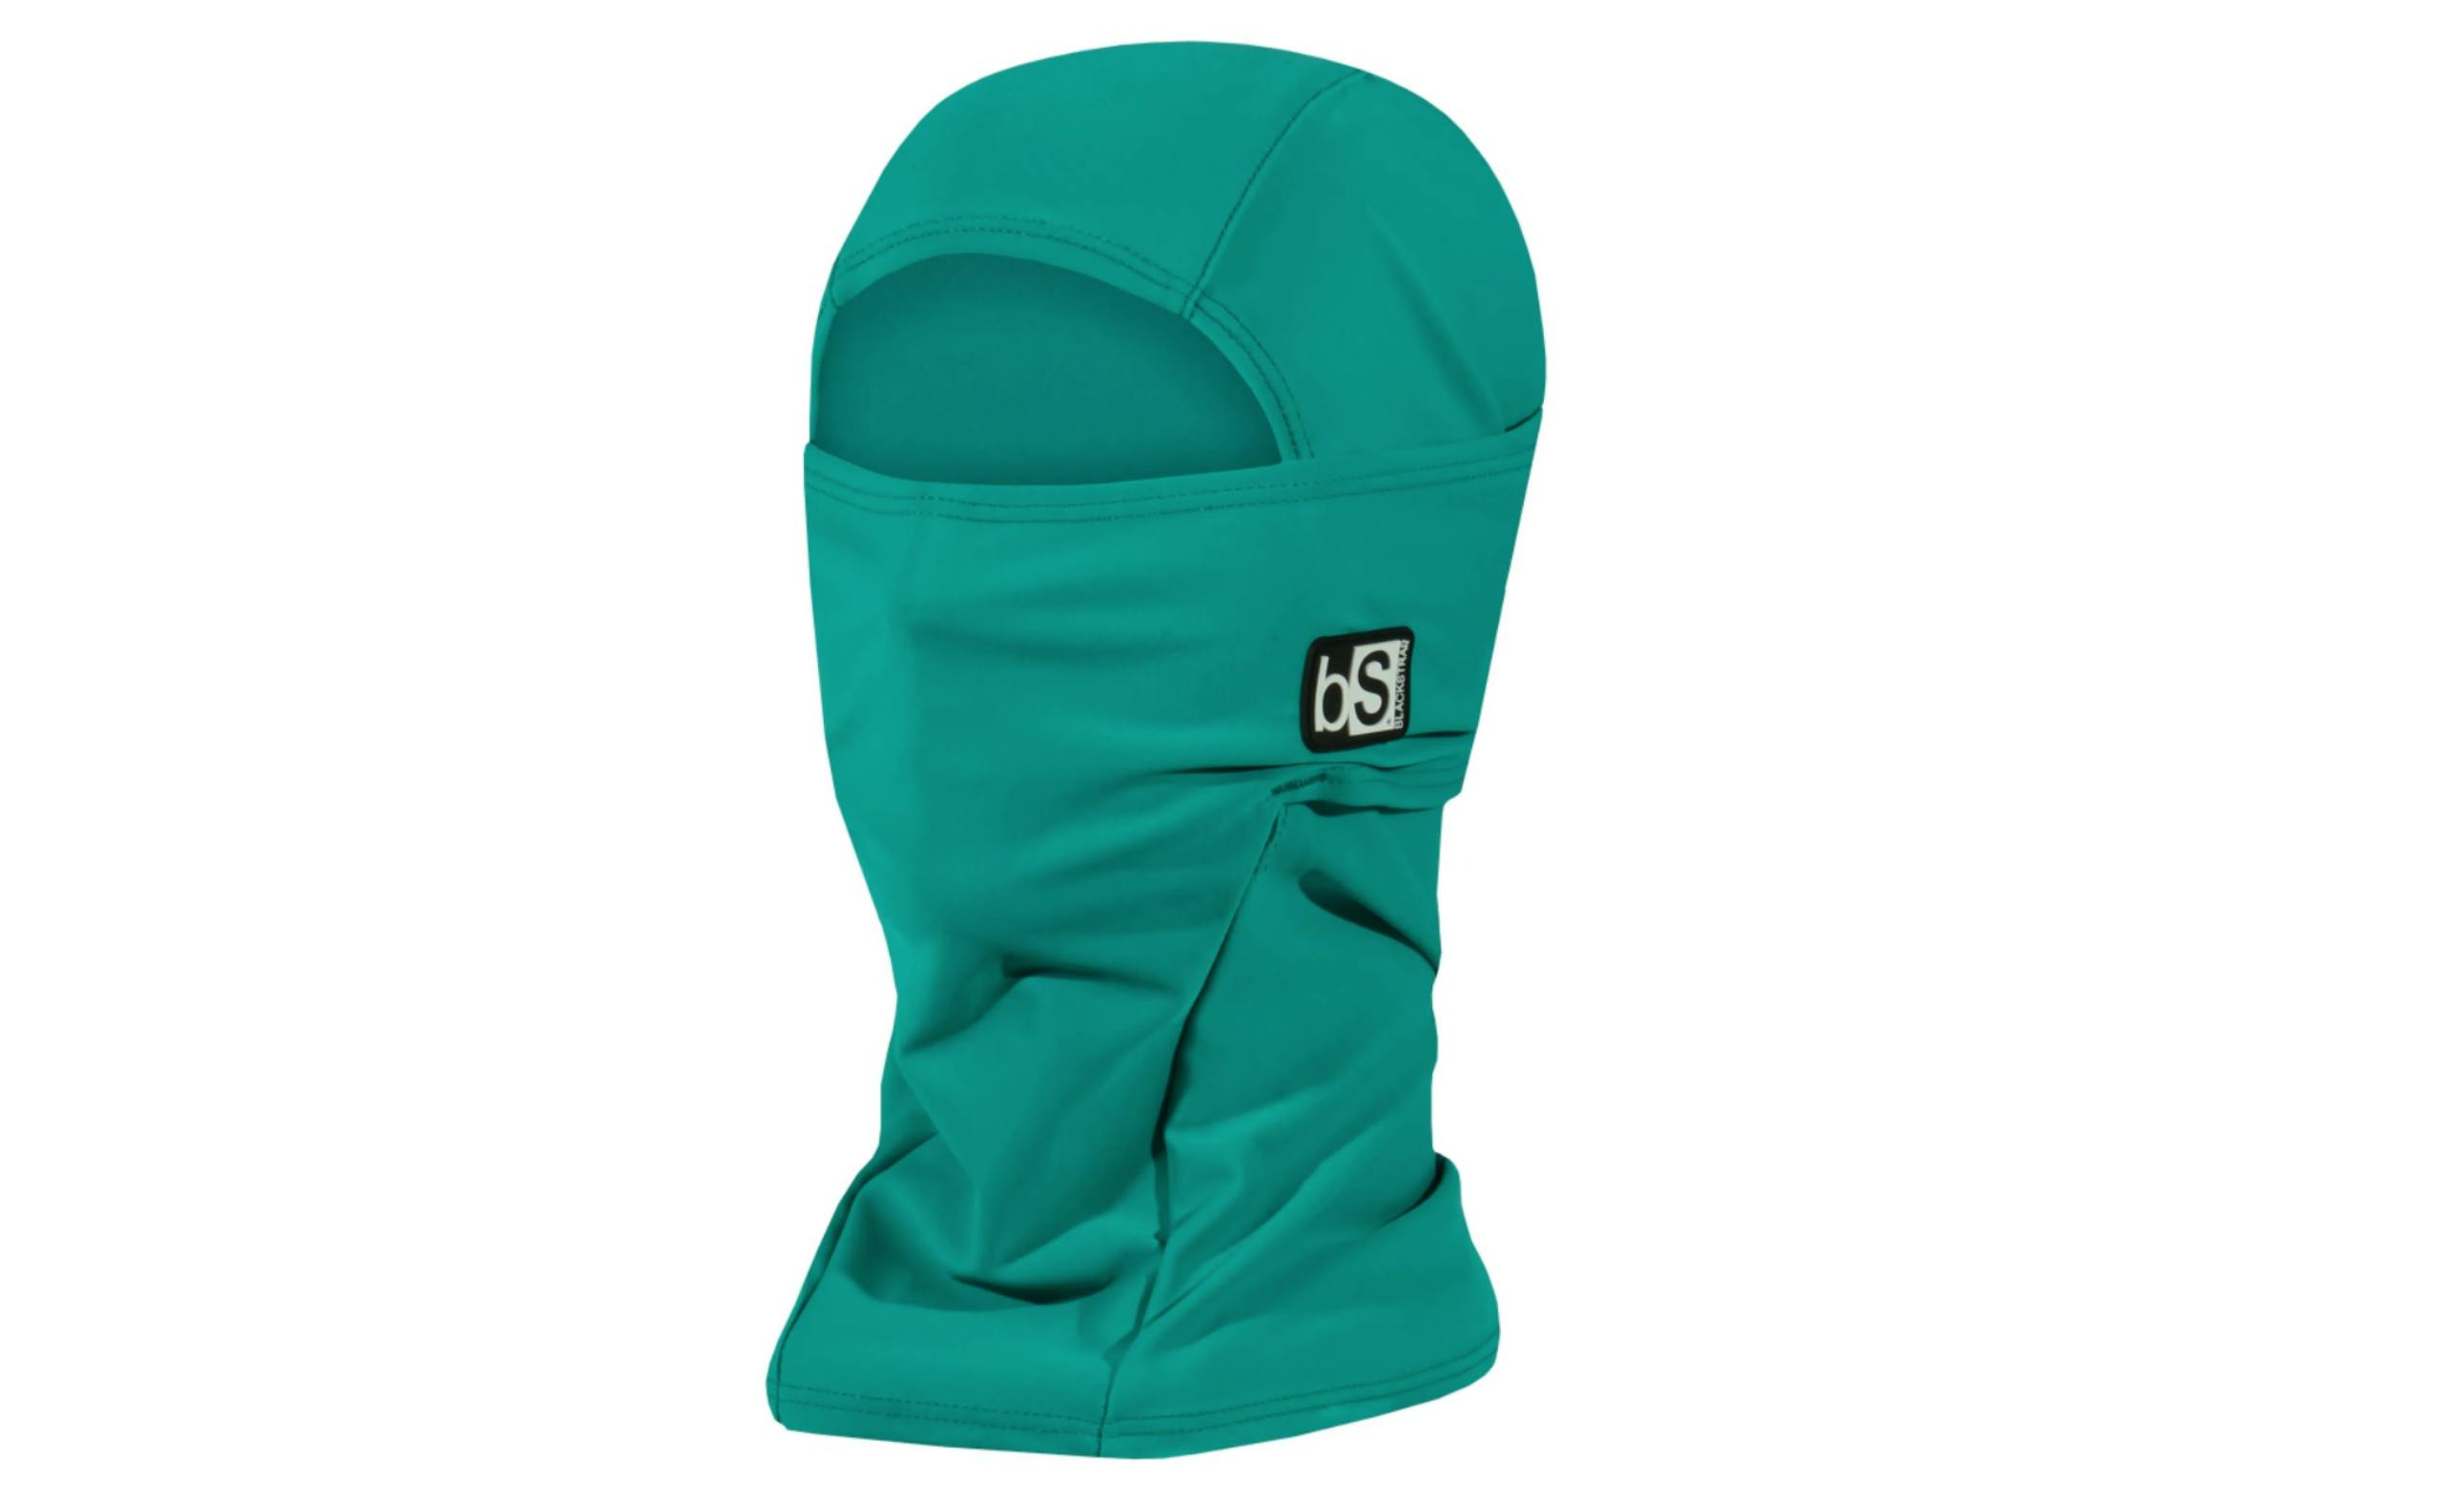 Product image of the BlackStrap The Hood Balaclava Facemask.